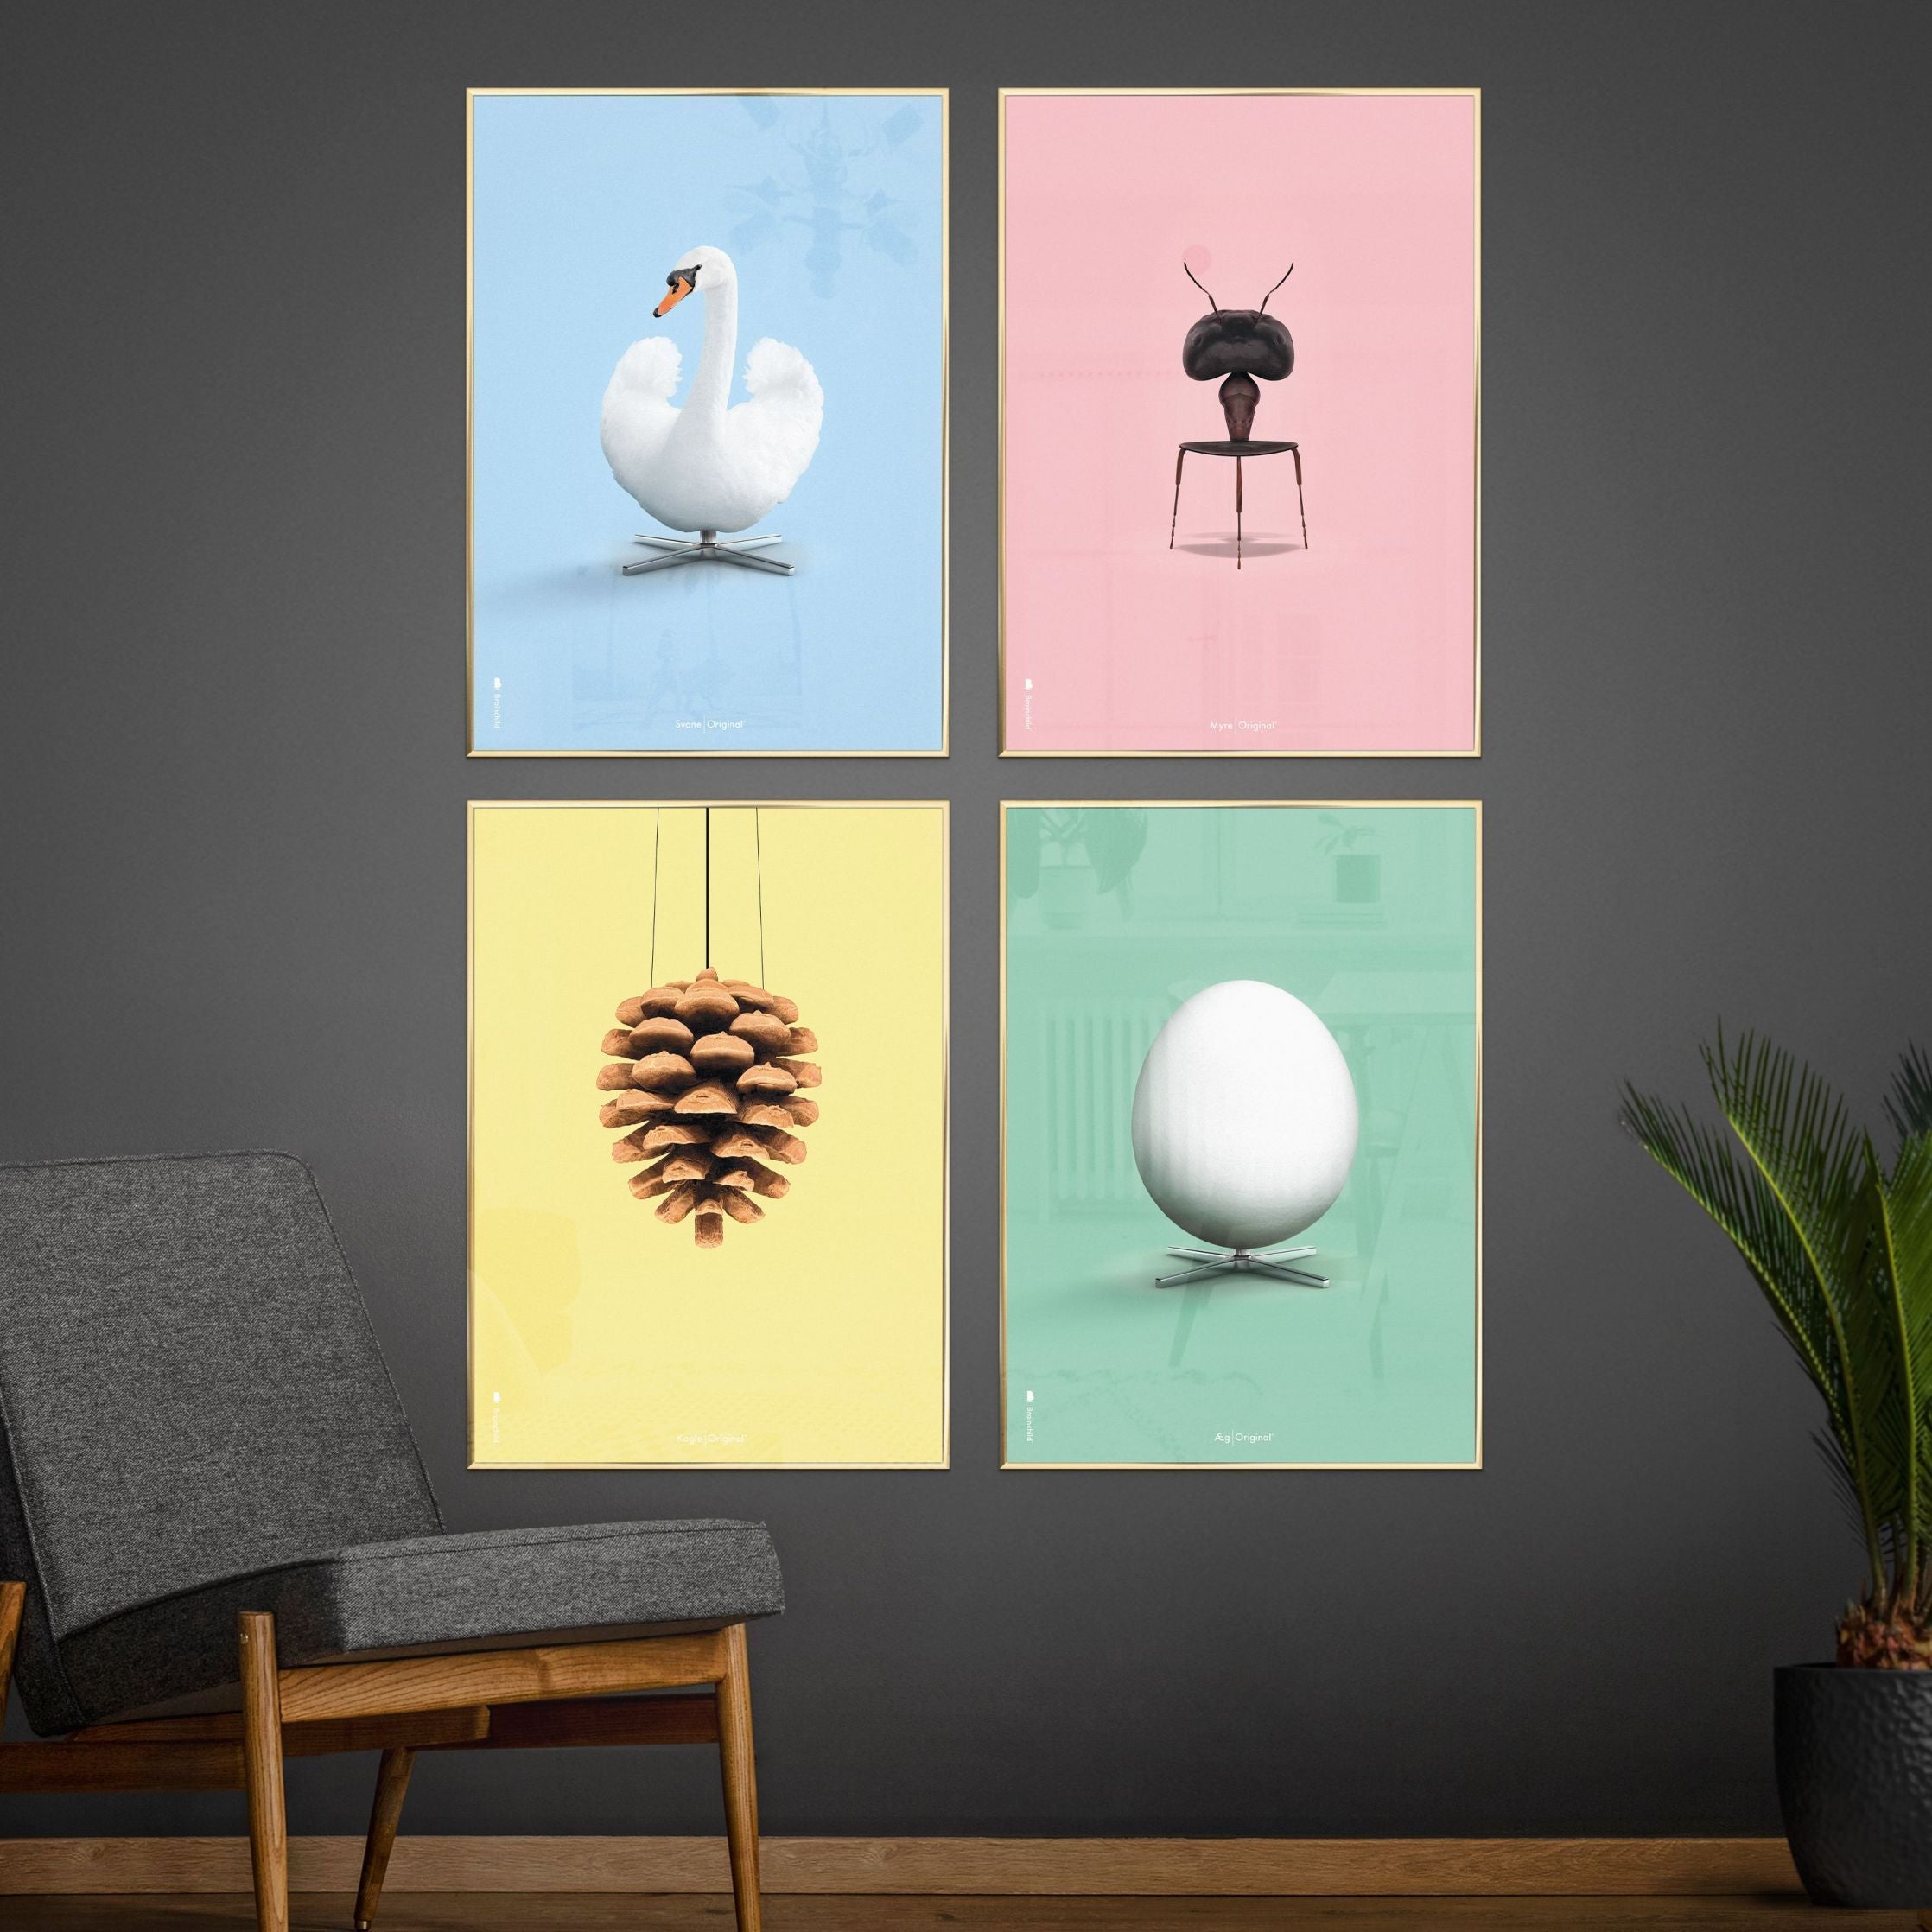 Brainchild Swan Classic Poster, Frame In Black Lacquered Wood 30x40 Cm, Light Blue Background